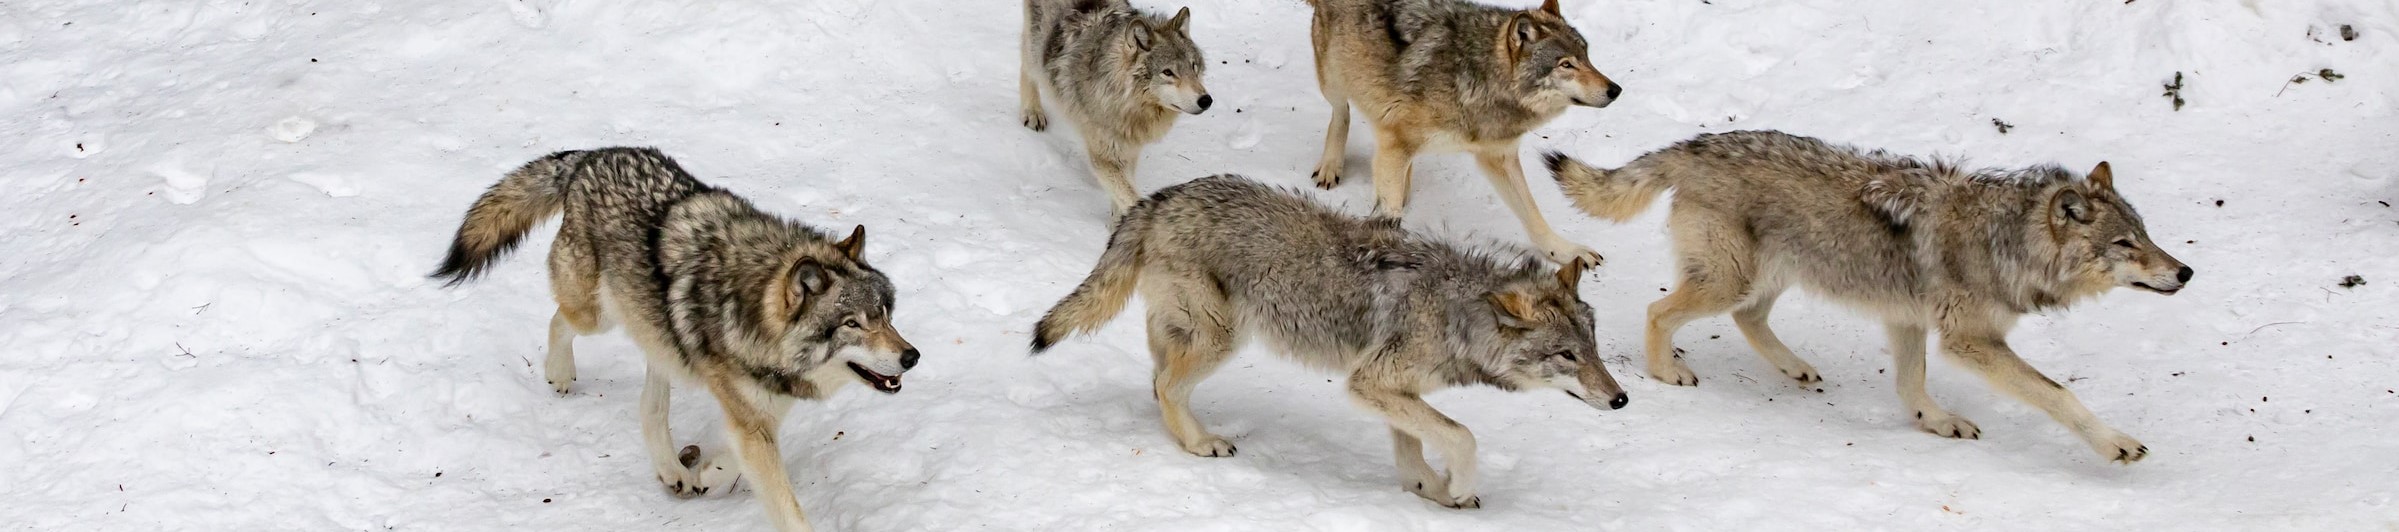 Pack of wolves running through snow, illustrating the wolf packs central to the Redrock case study